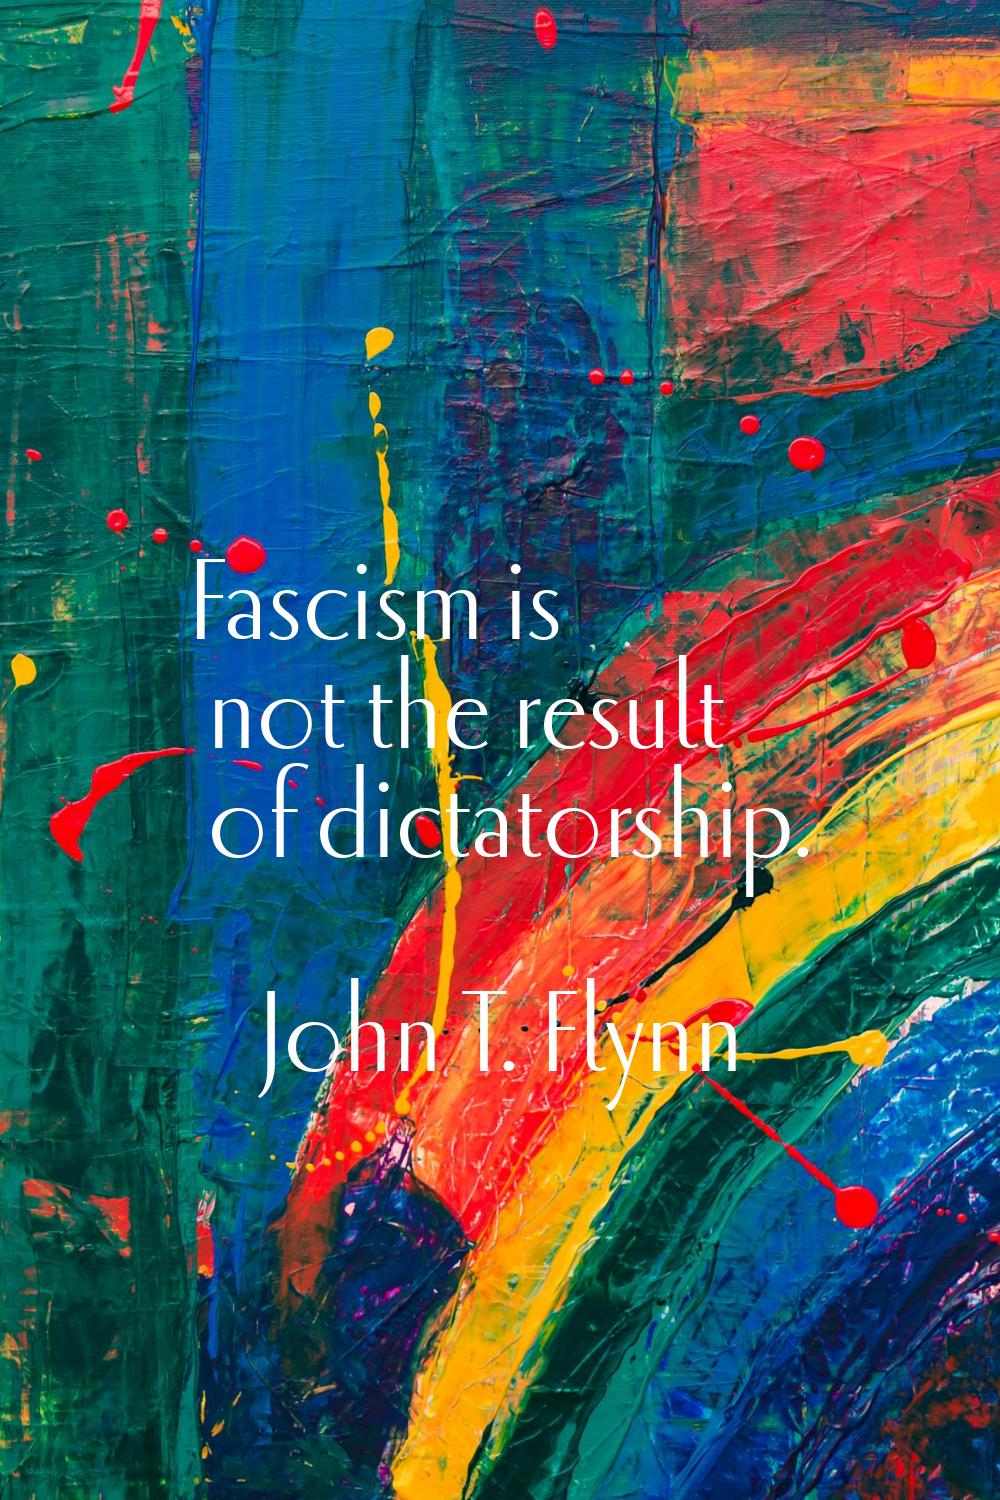 Fascism is not the result of dictatorship.